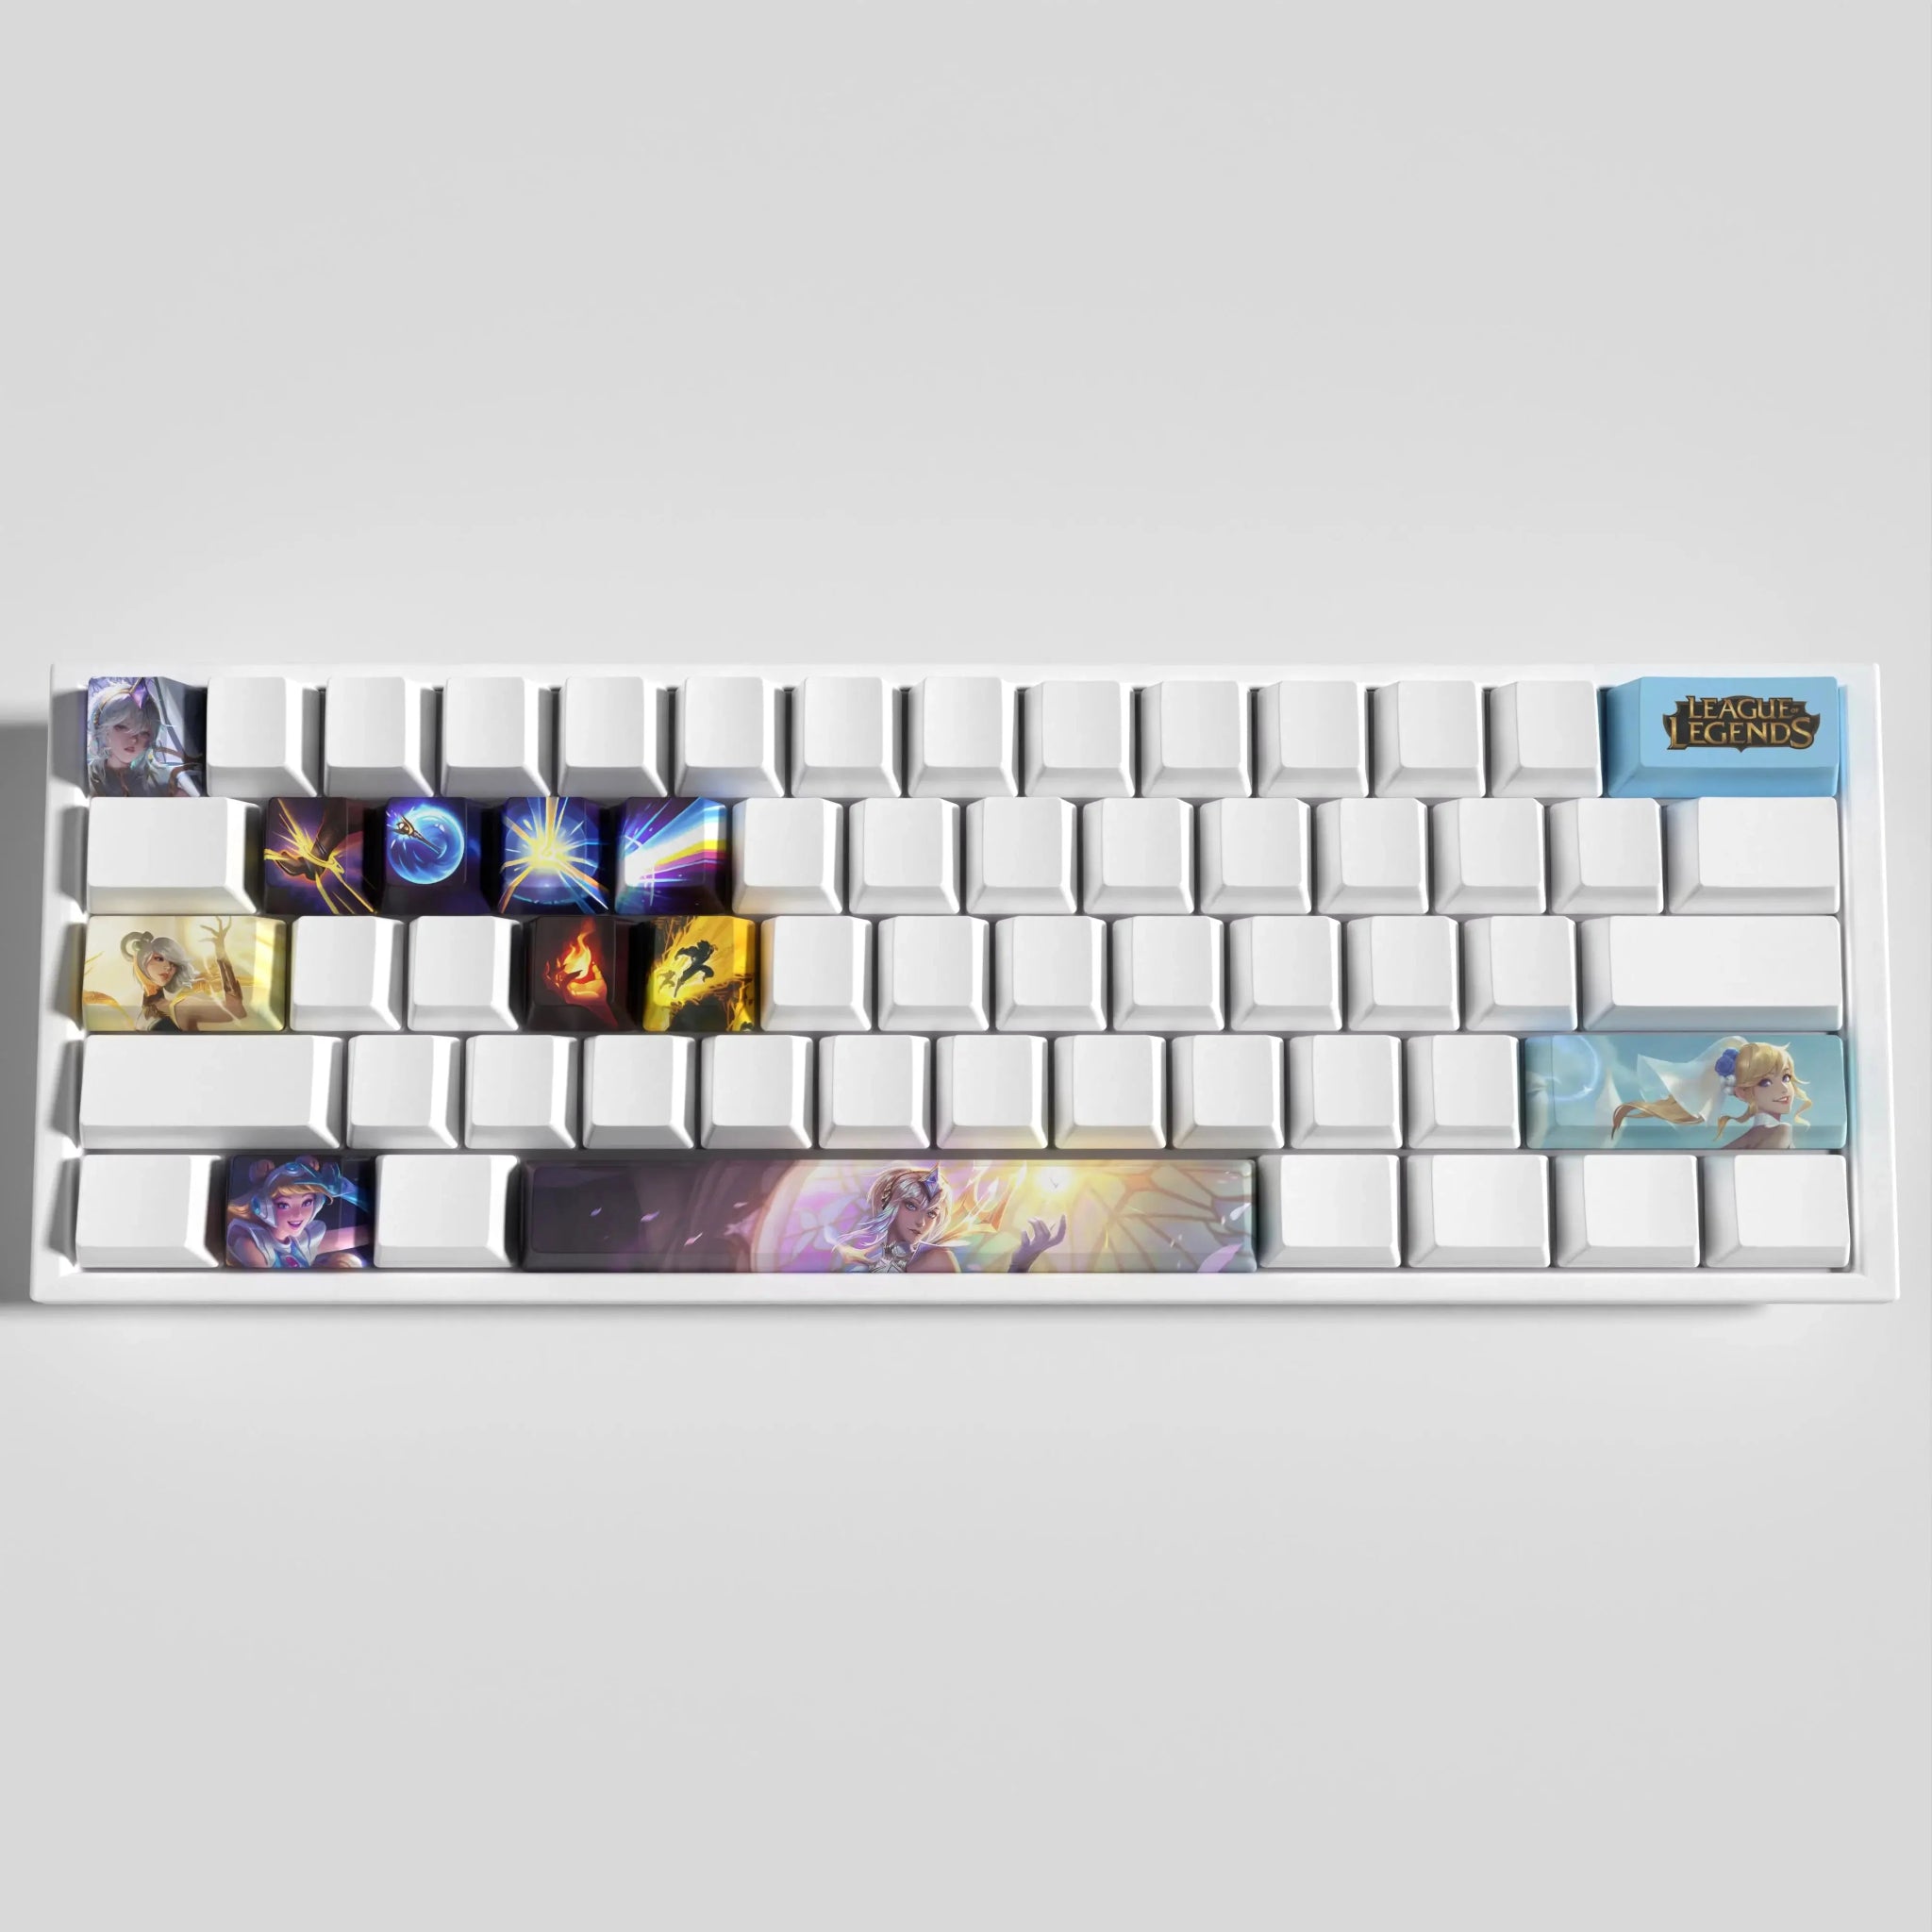 Keycaps Lux - Déco Gaming